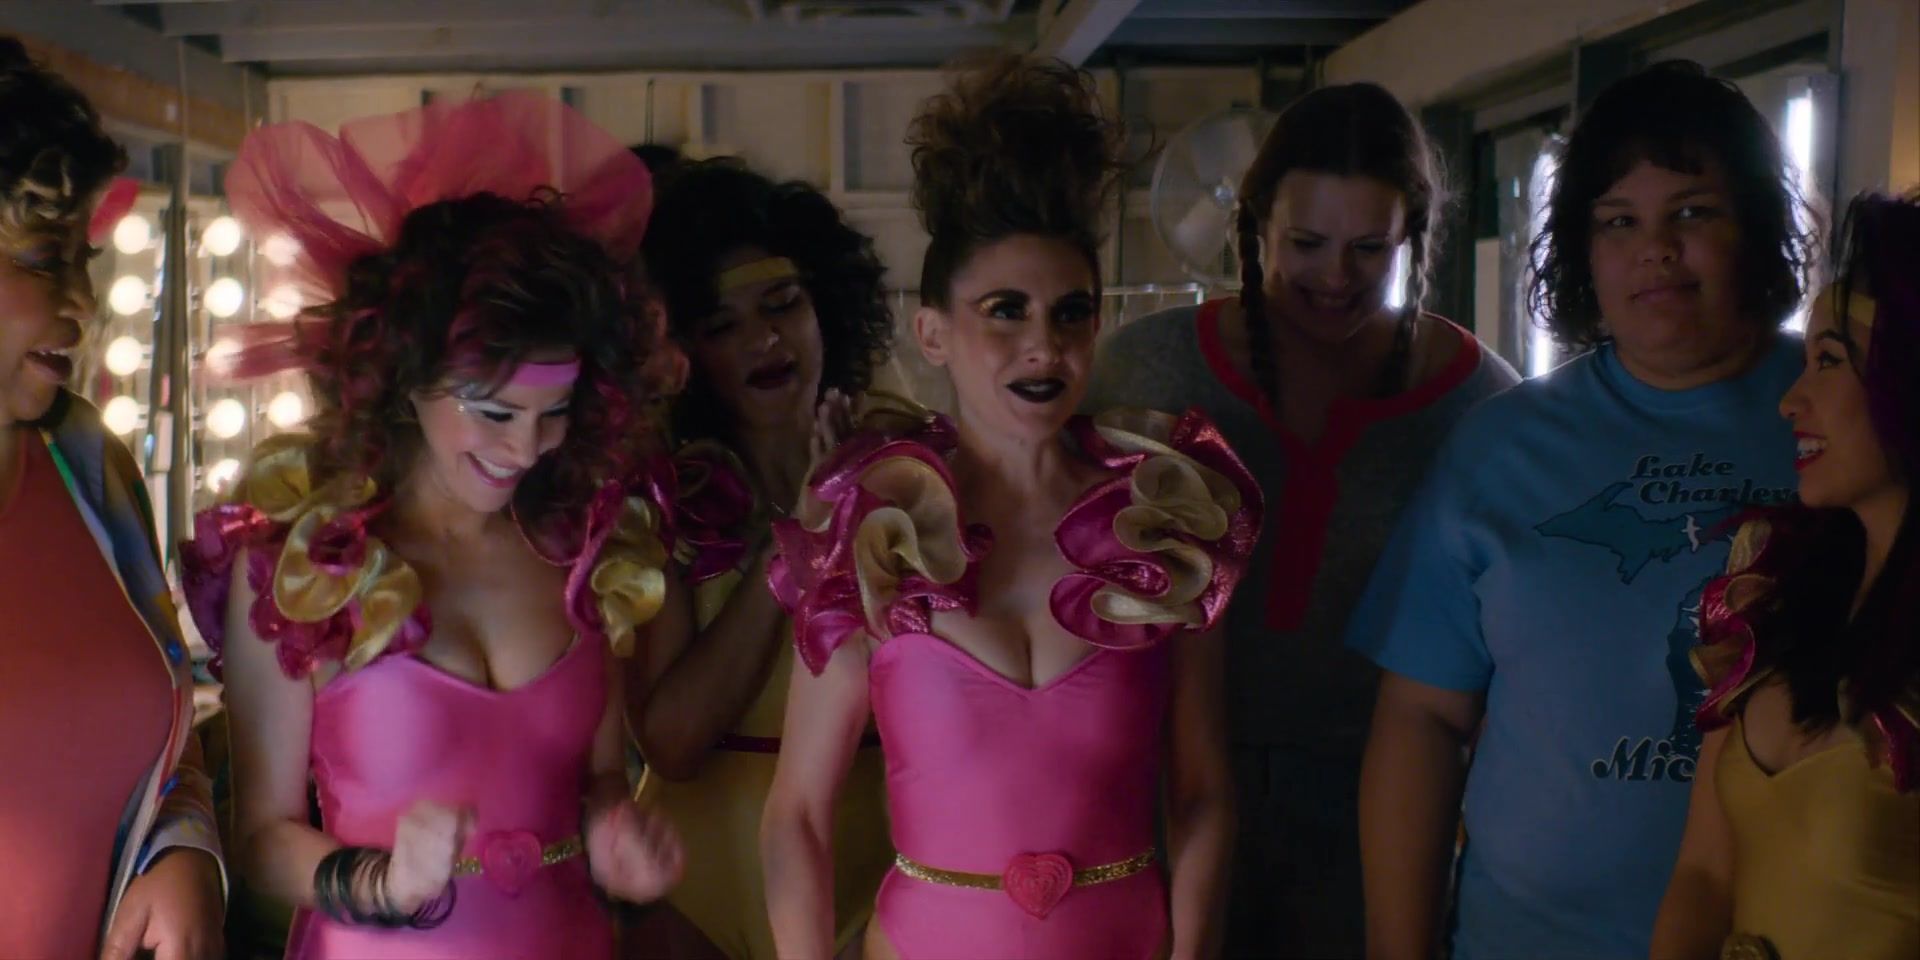 CameraBoys Alison Brie, Kate Nash nude - Glow s03e08-10 (2019) Pick Up - 1